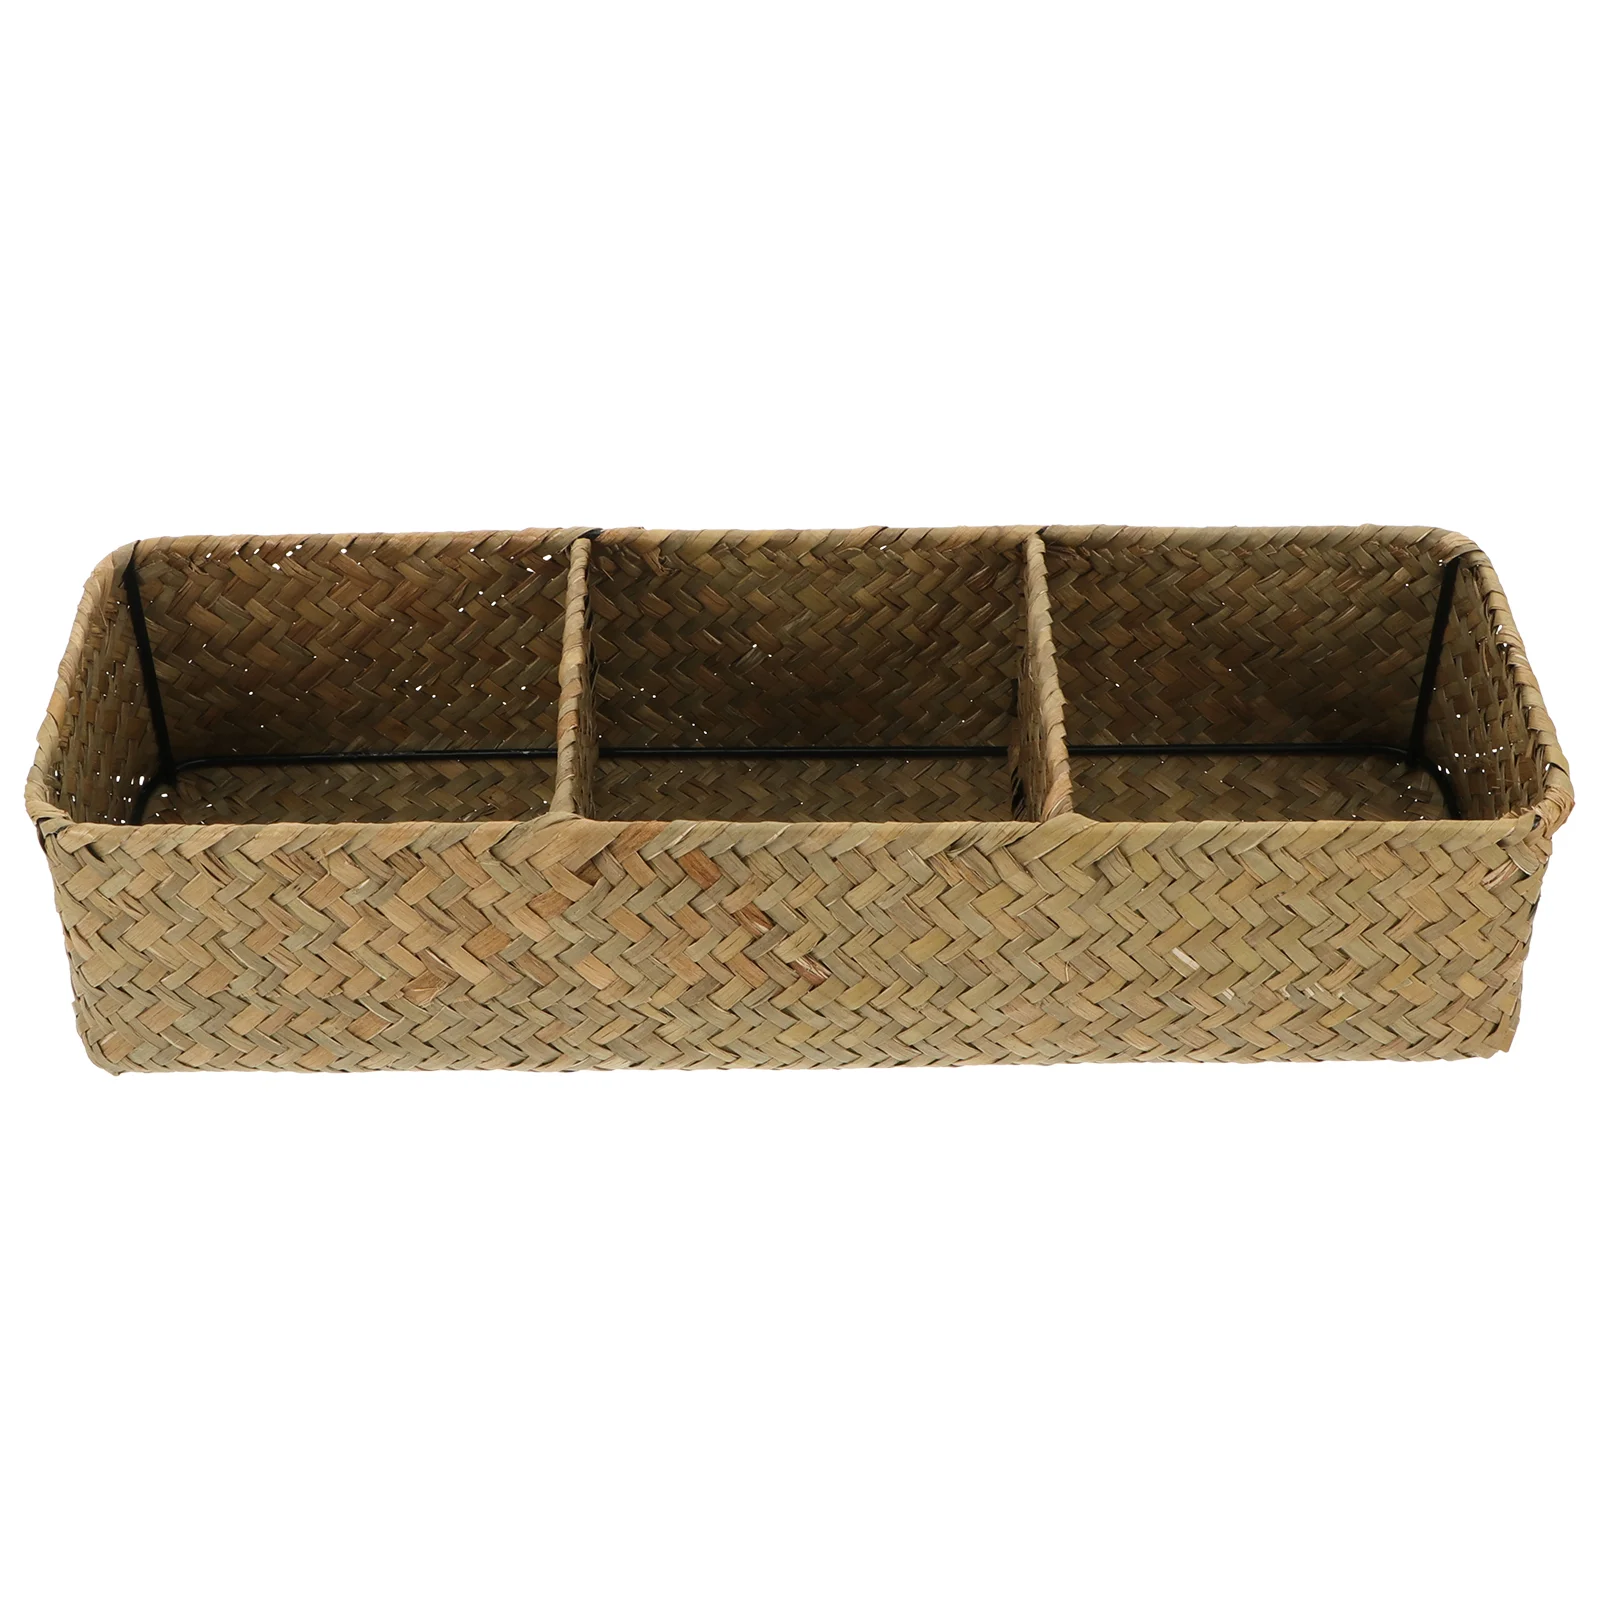 

Compartments Home Storage Basket Box Handmade Seagrass Woven Storage Box Sea Grass Woven Sundries Storage Container